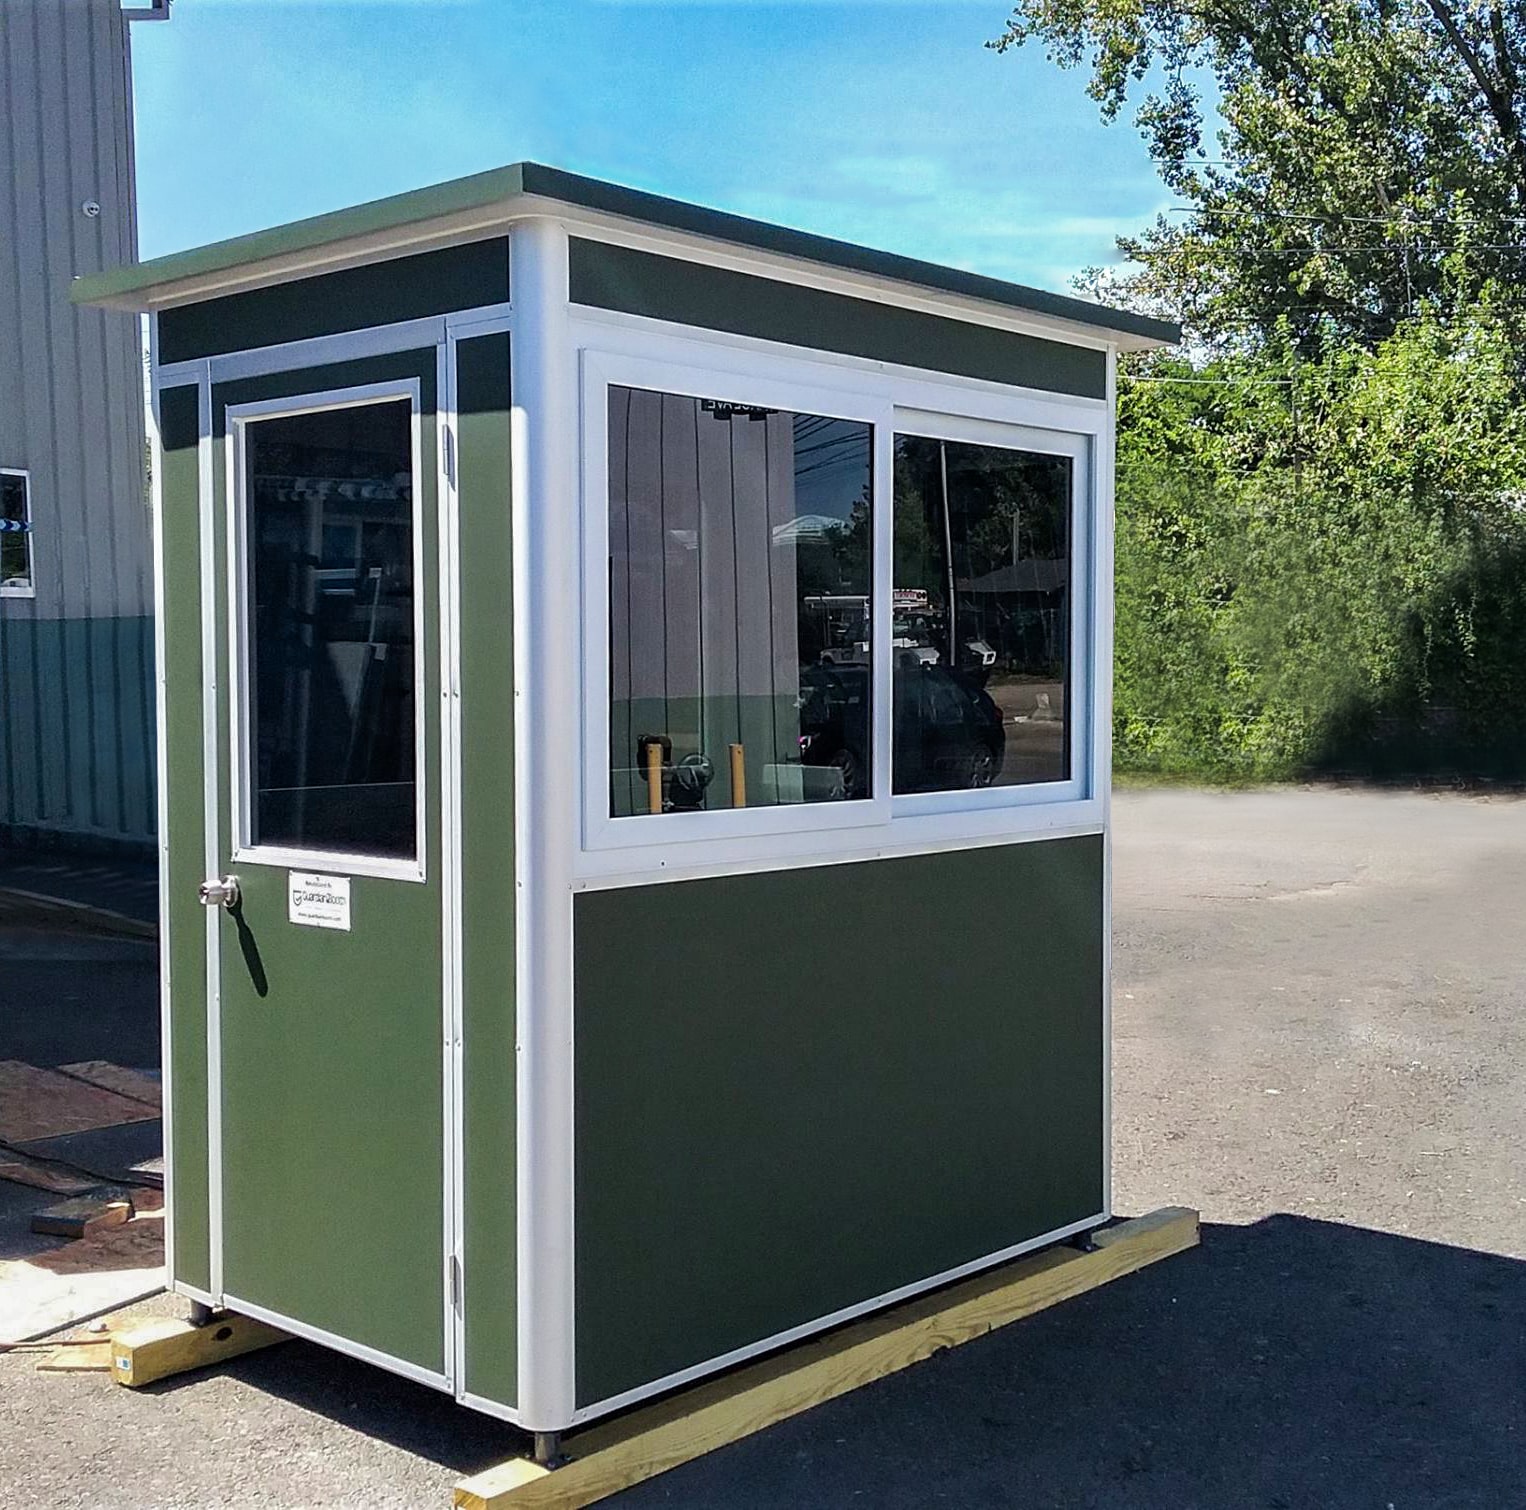 4x6 army green security booth for a local government facility